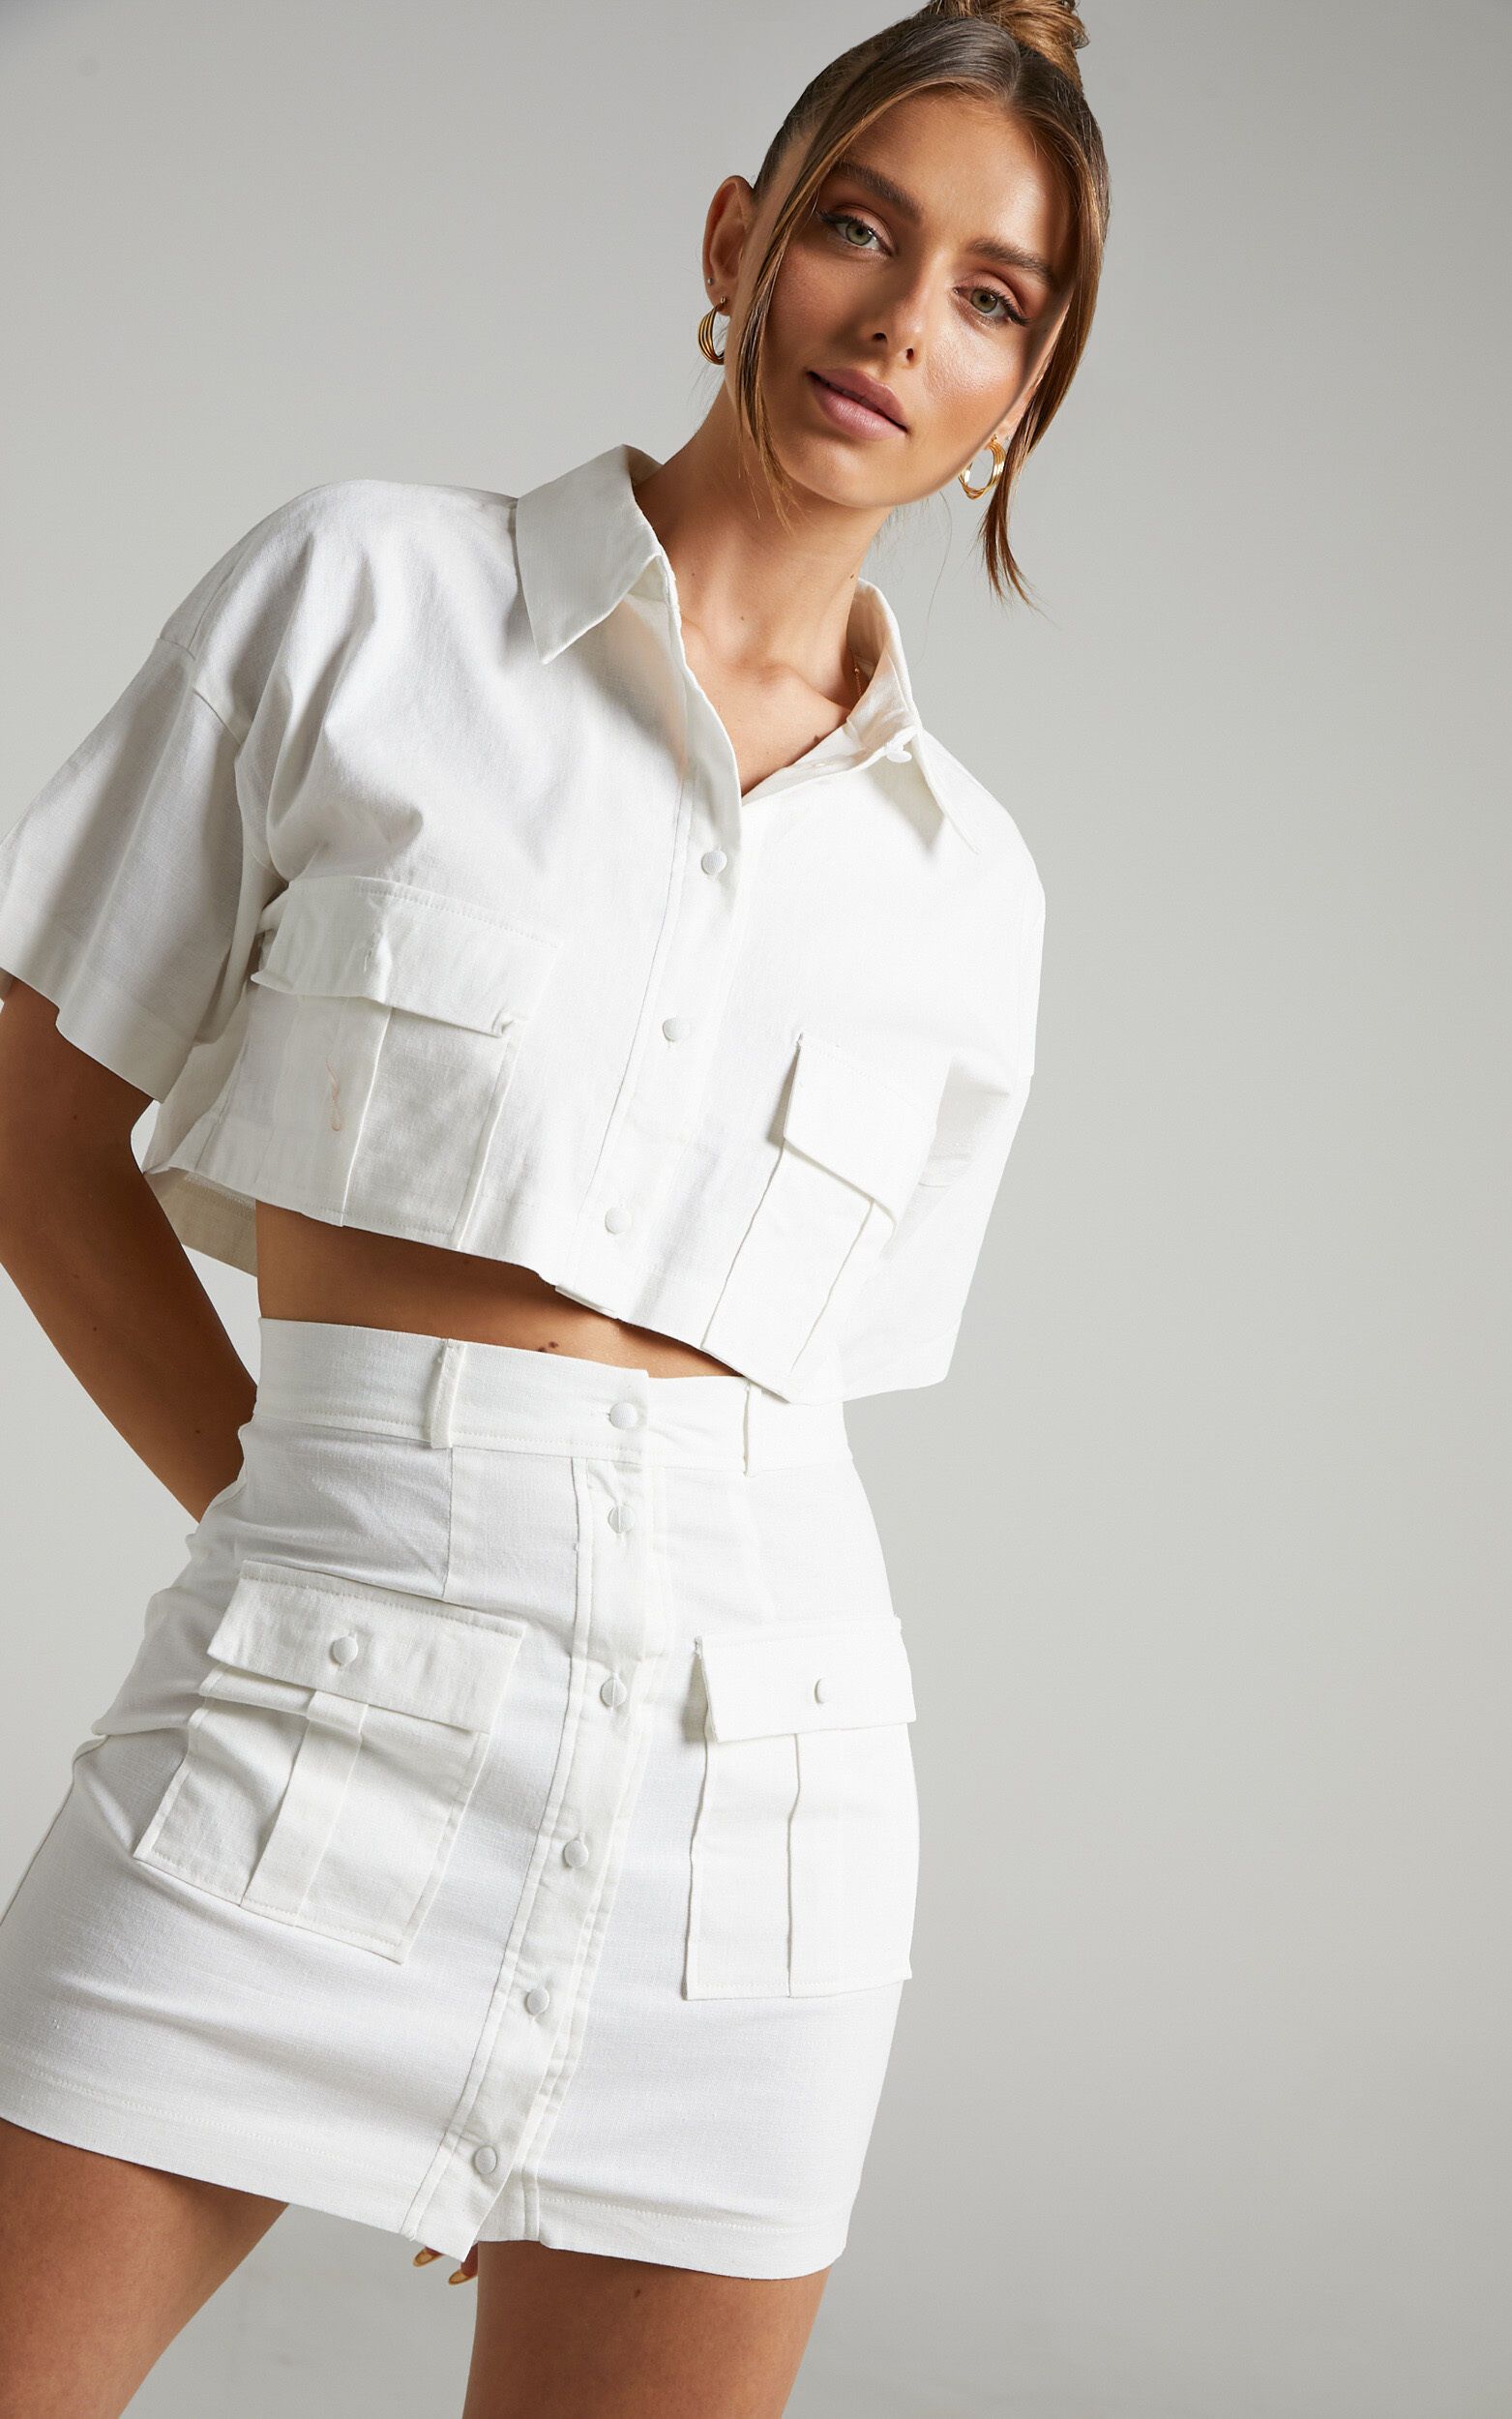 Navine Two Piece Skirt Set with Pockets in White | Showpo - deactived